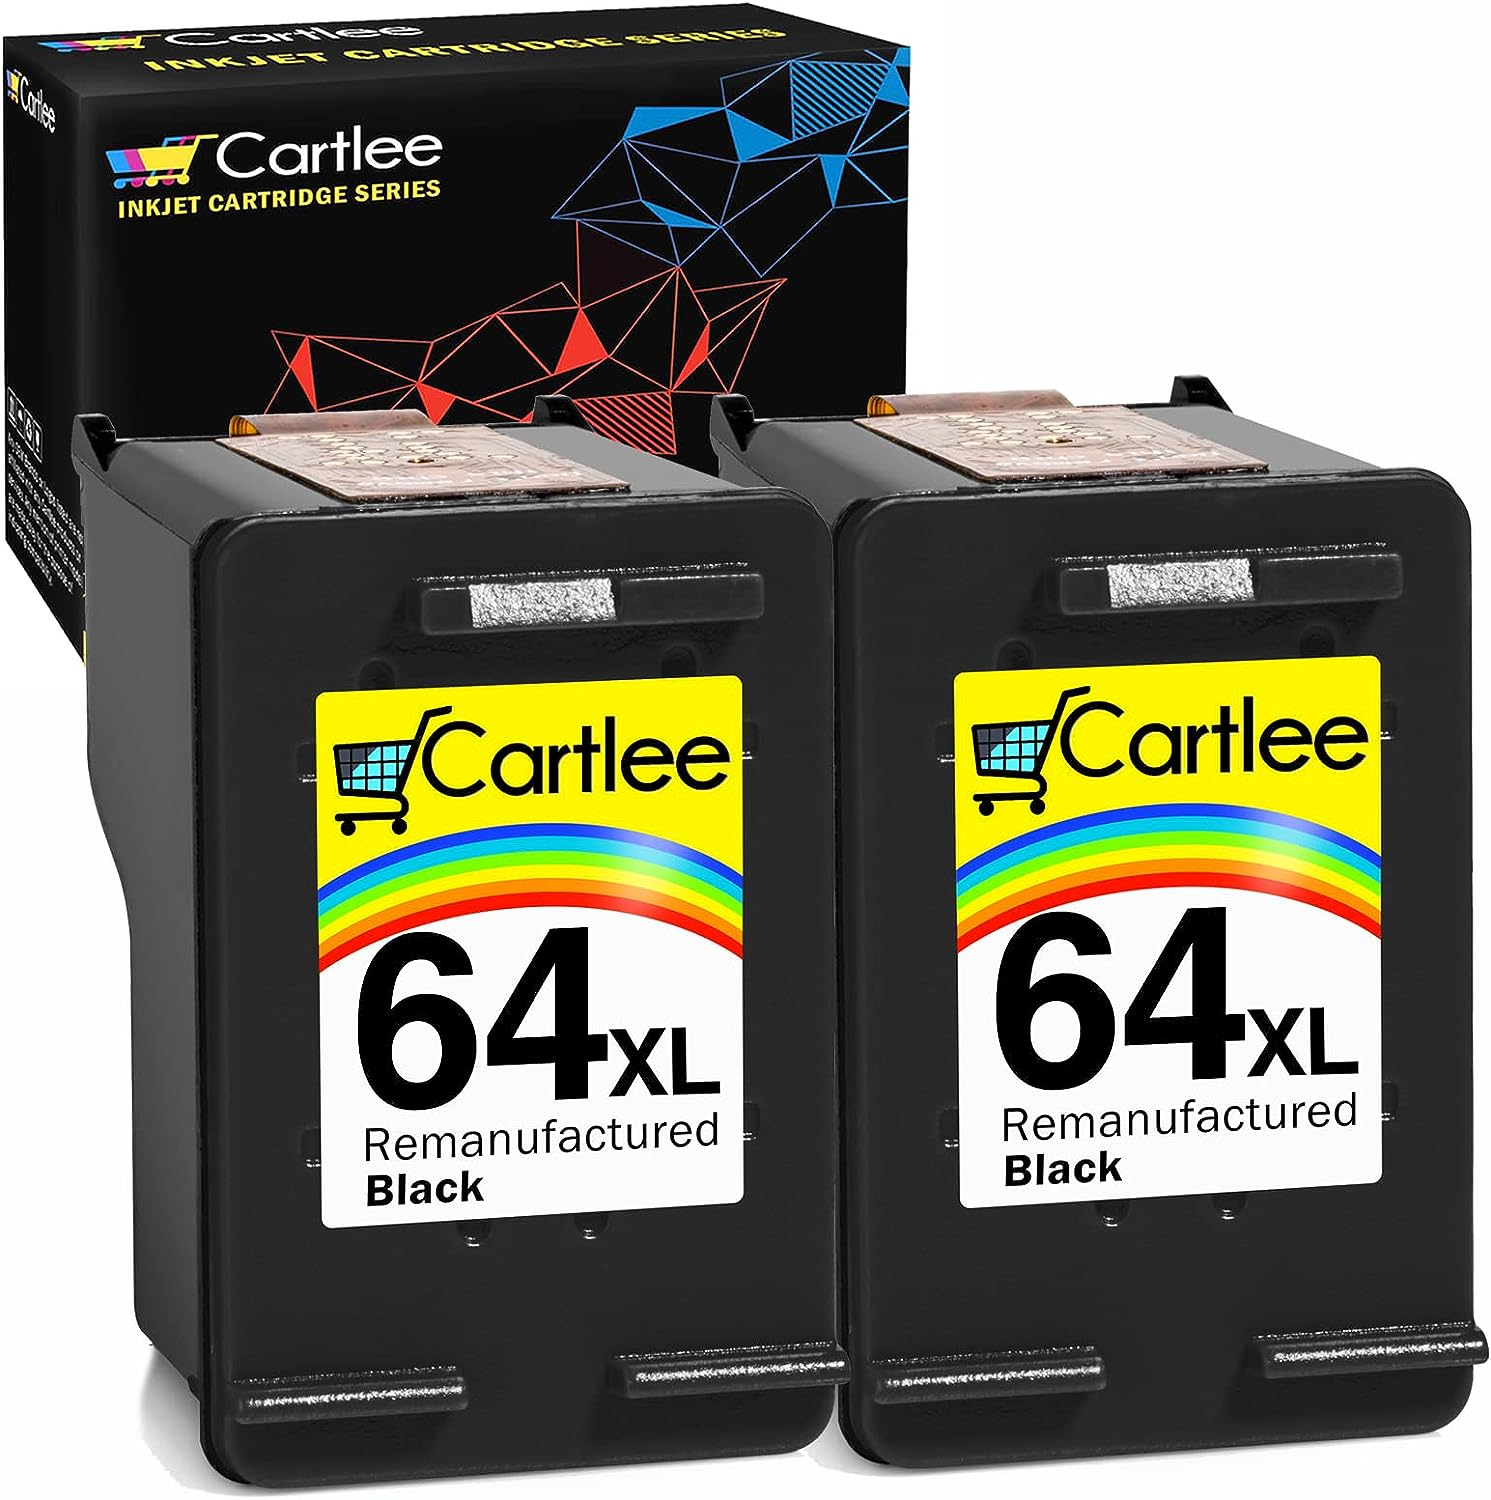 Cartlee Remanufactured Ink Cartridge Replacement for [...]